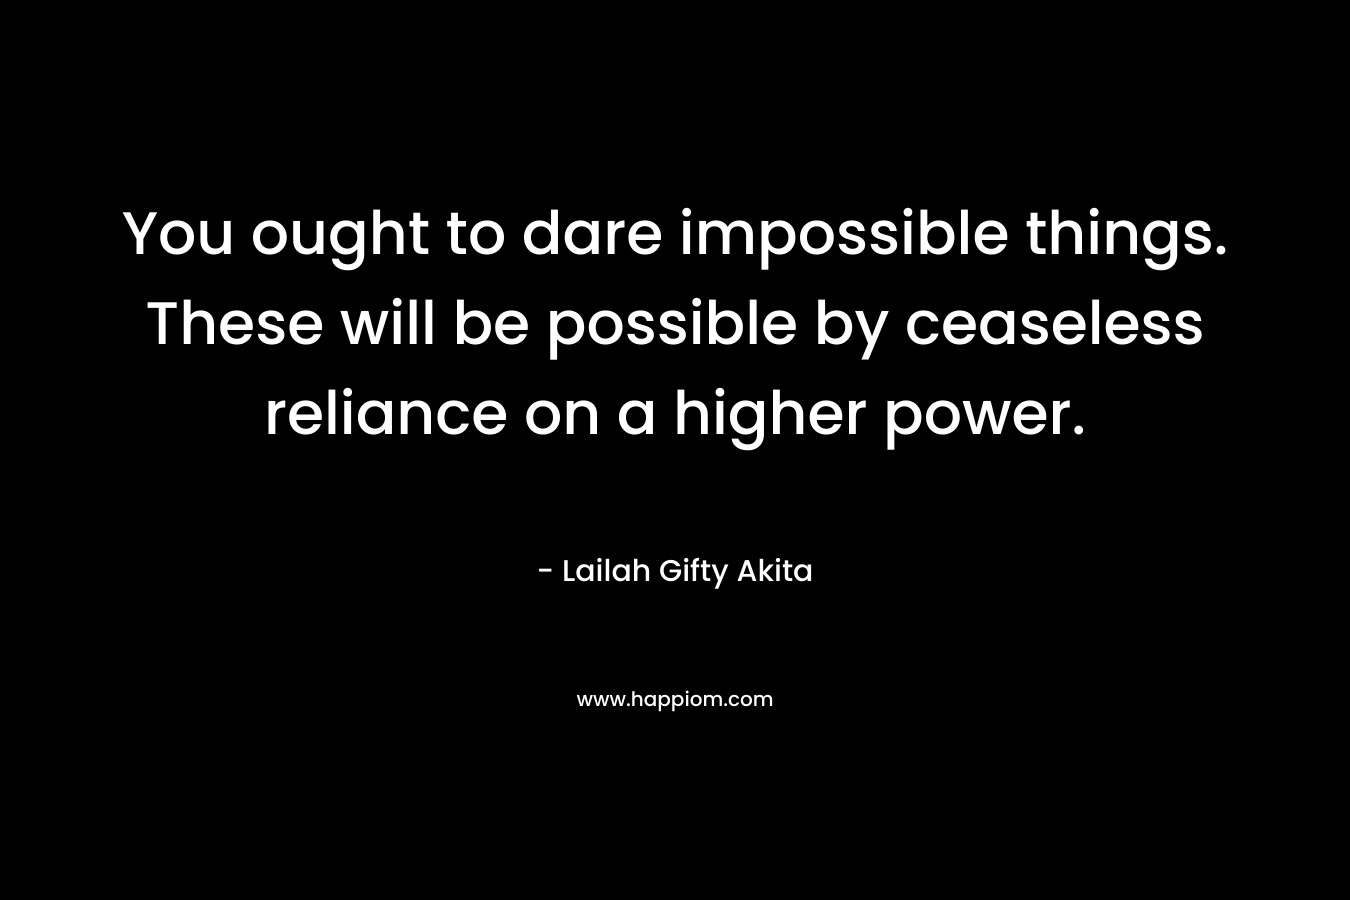 You ought to dare impossible things. These will be possible by ceaseless reliance on a higher power.